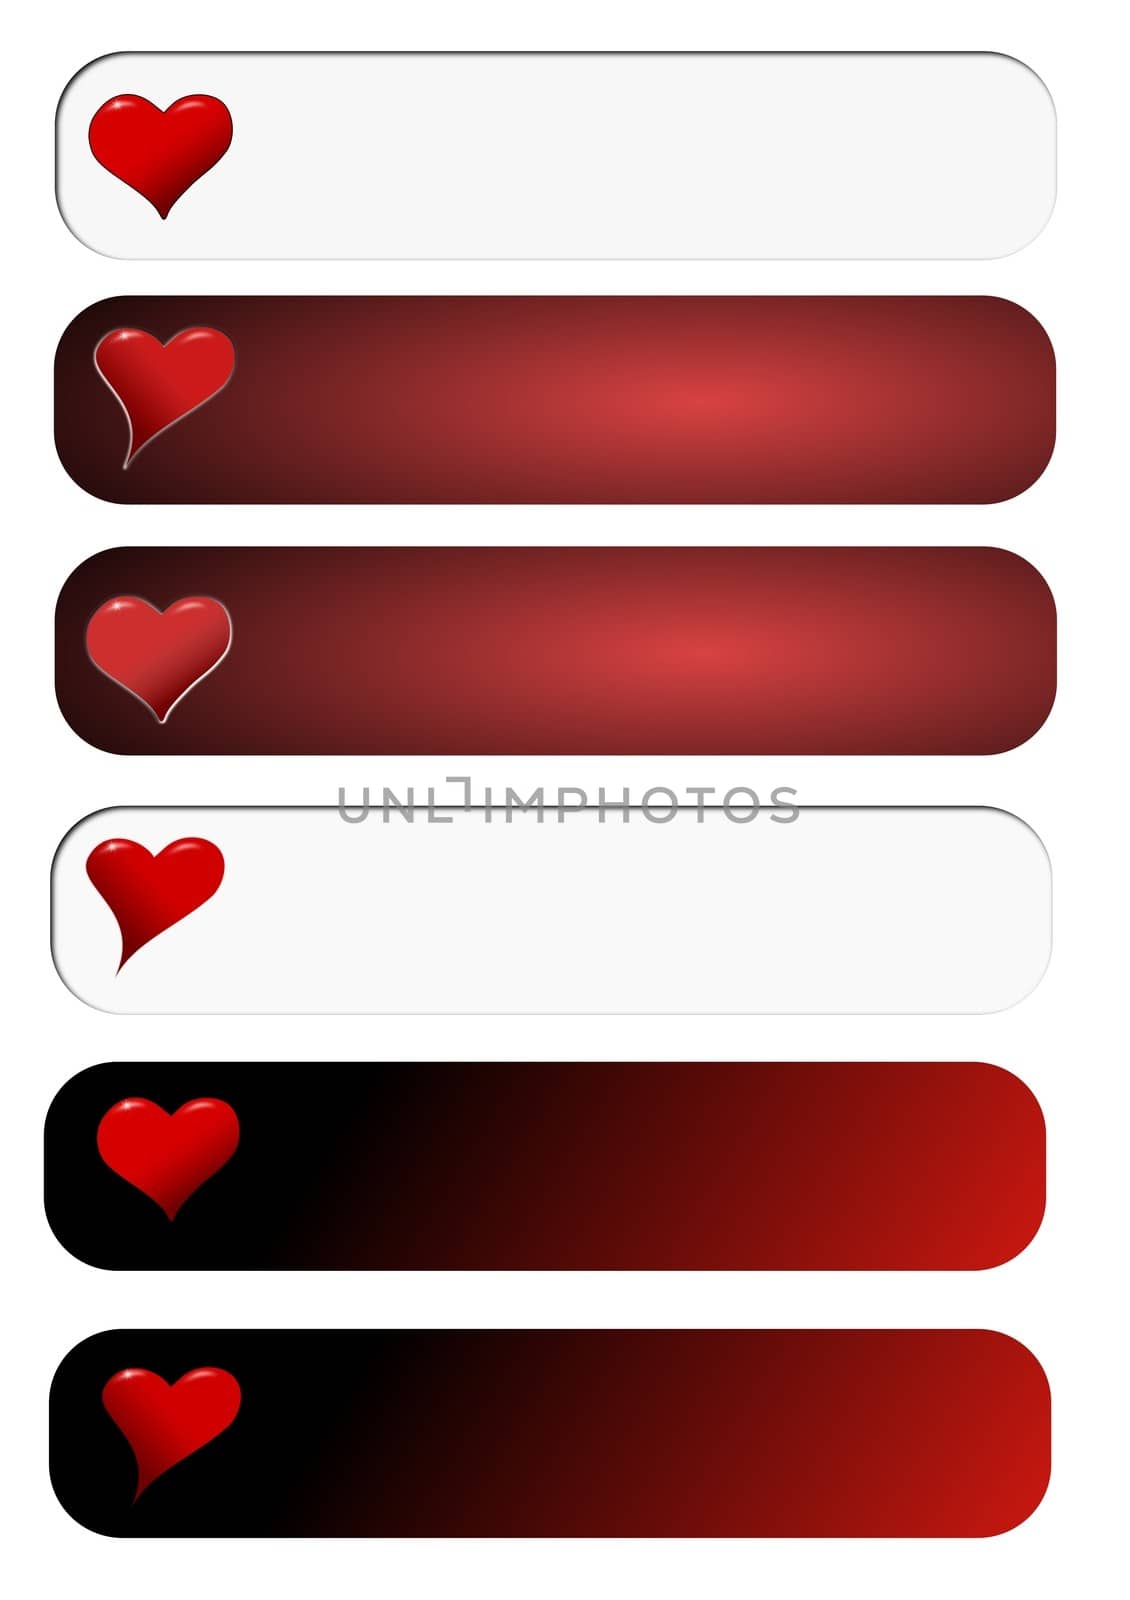 Banners with heart on a red hued background on a white isolated